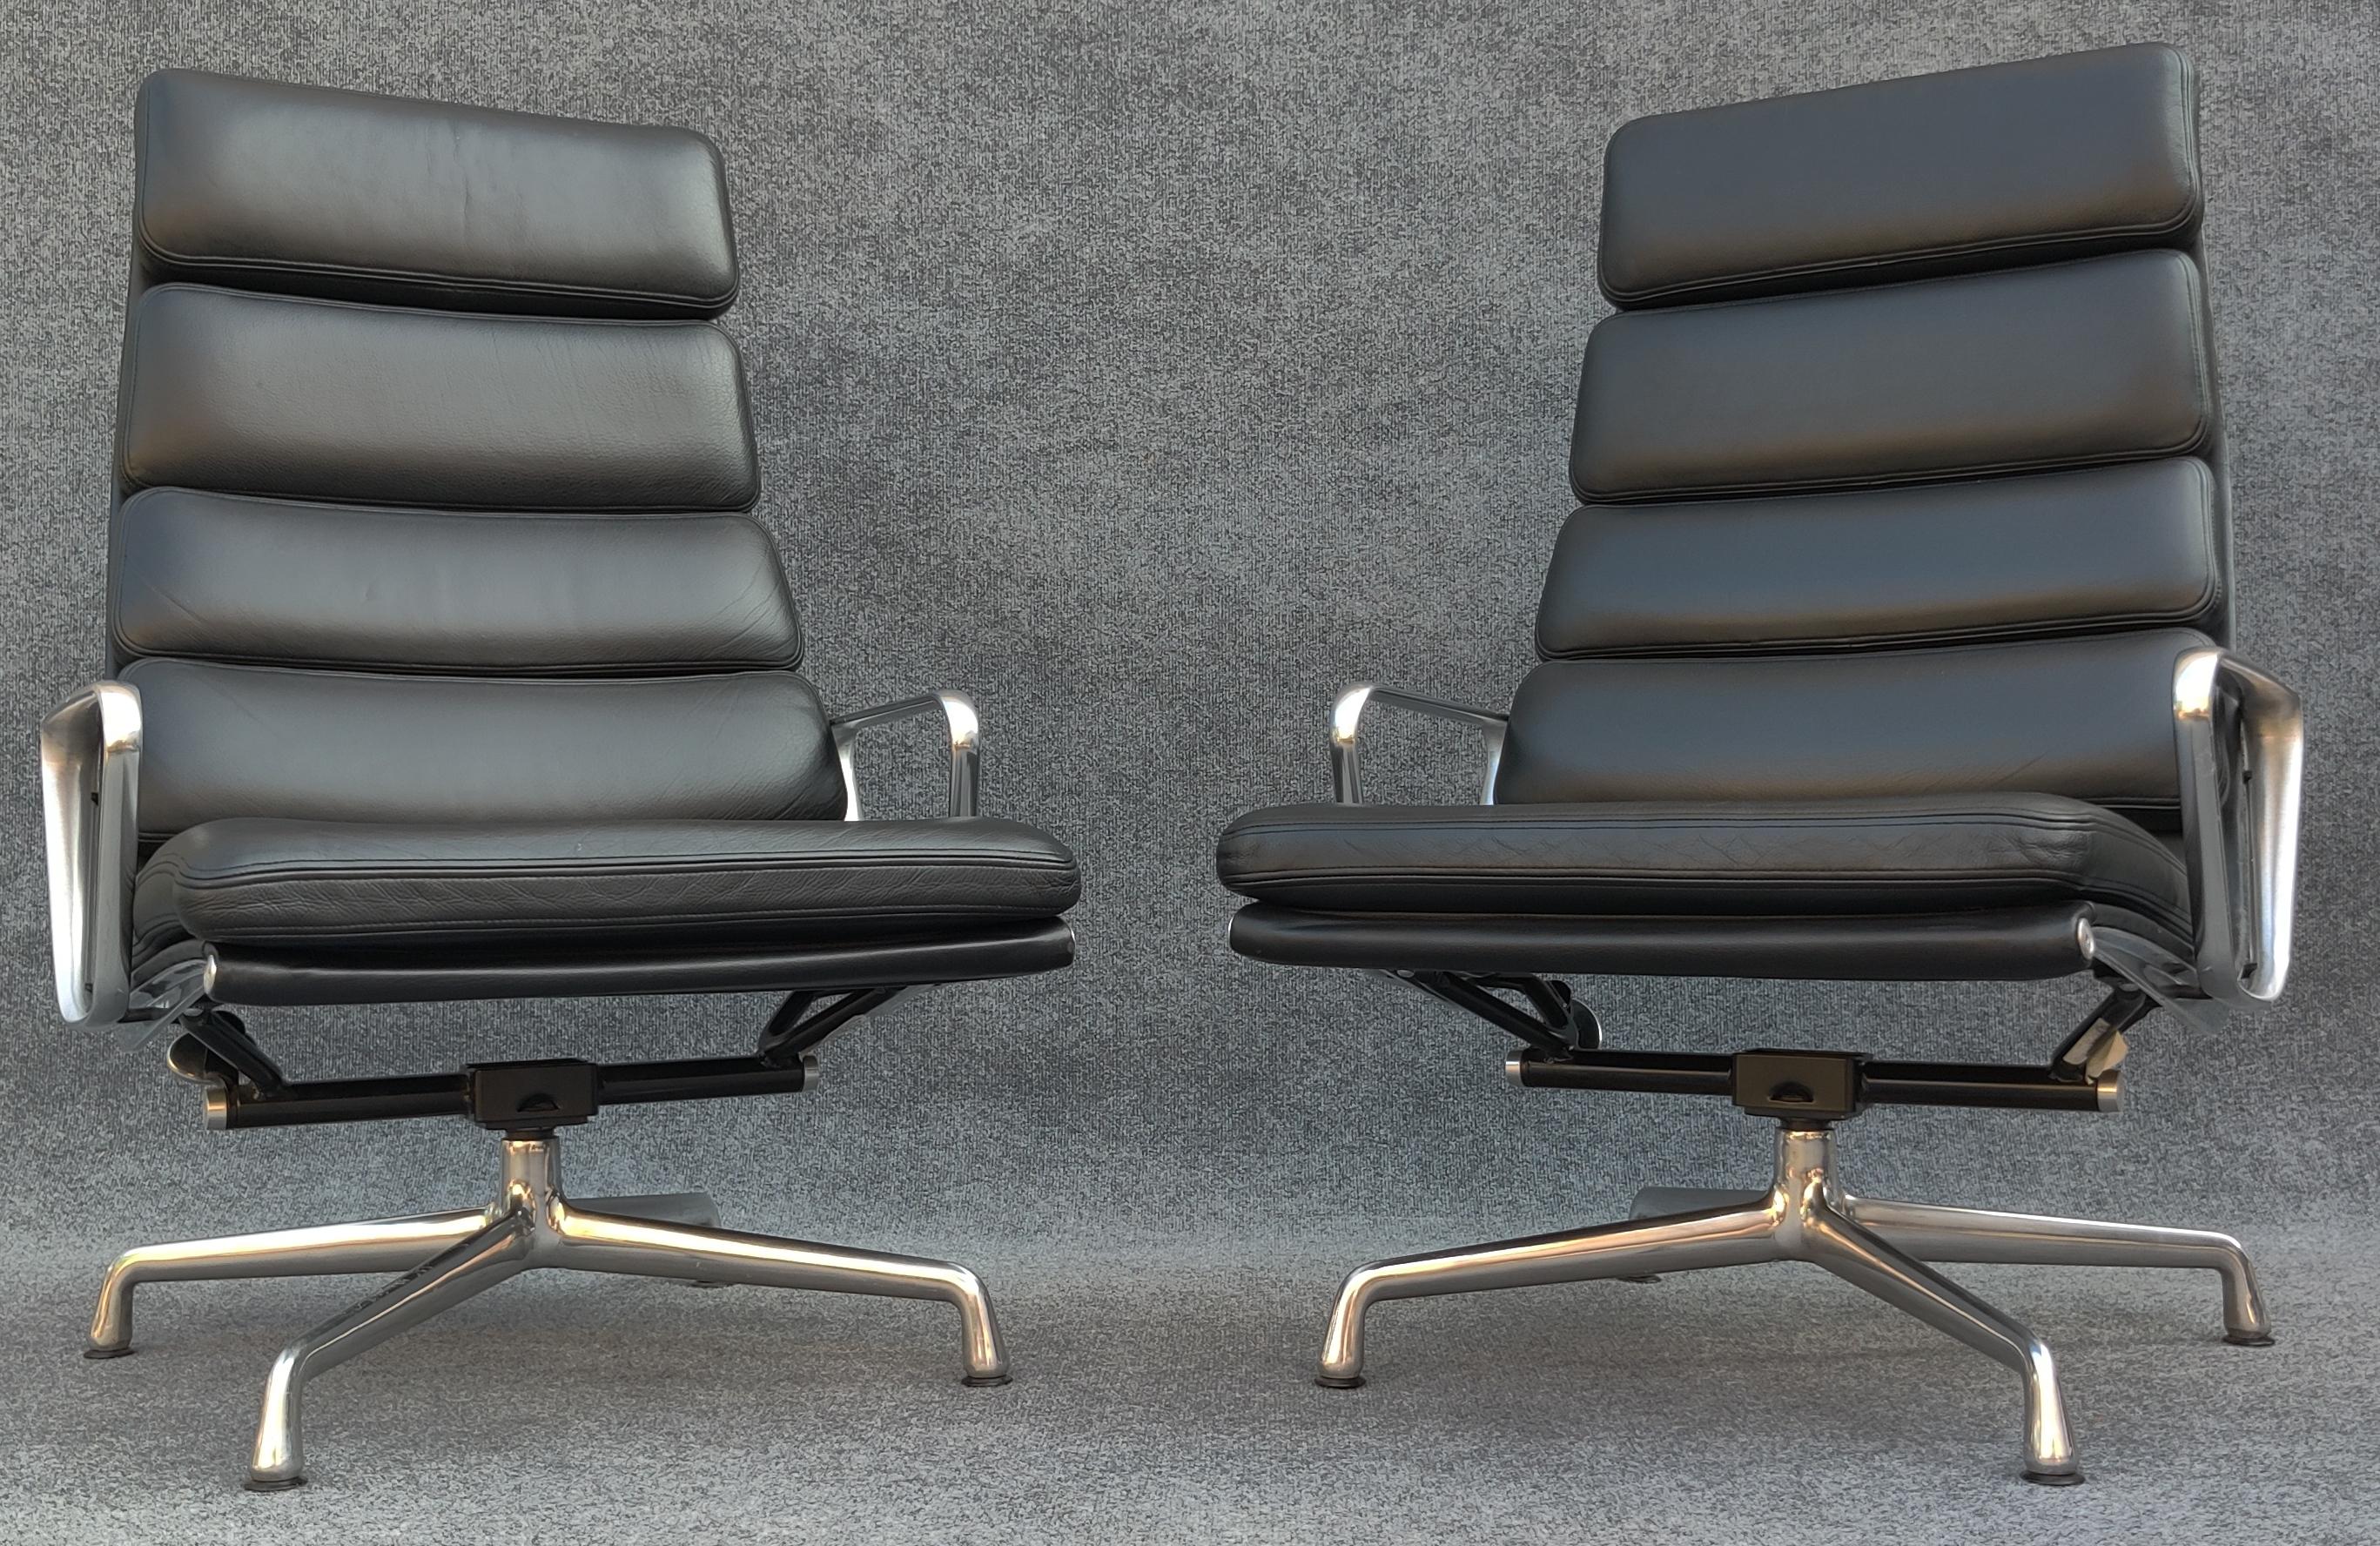 Designed by Charles and Ray Eames in the late 1950s, this pair of black leather lounge chairs is the pinnacle of the Herman Miller Aluminum Group family of seating. This pair is not only of the lounge variety, but also features the iconic 4-prong